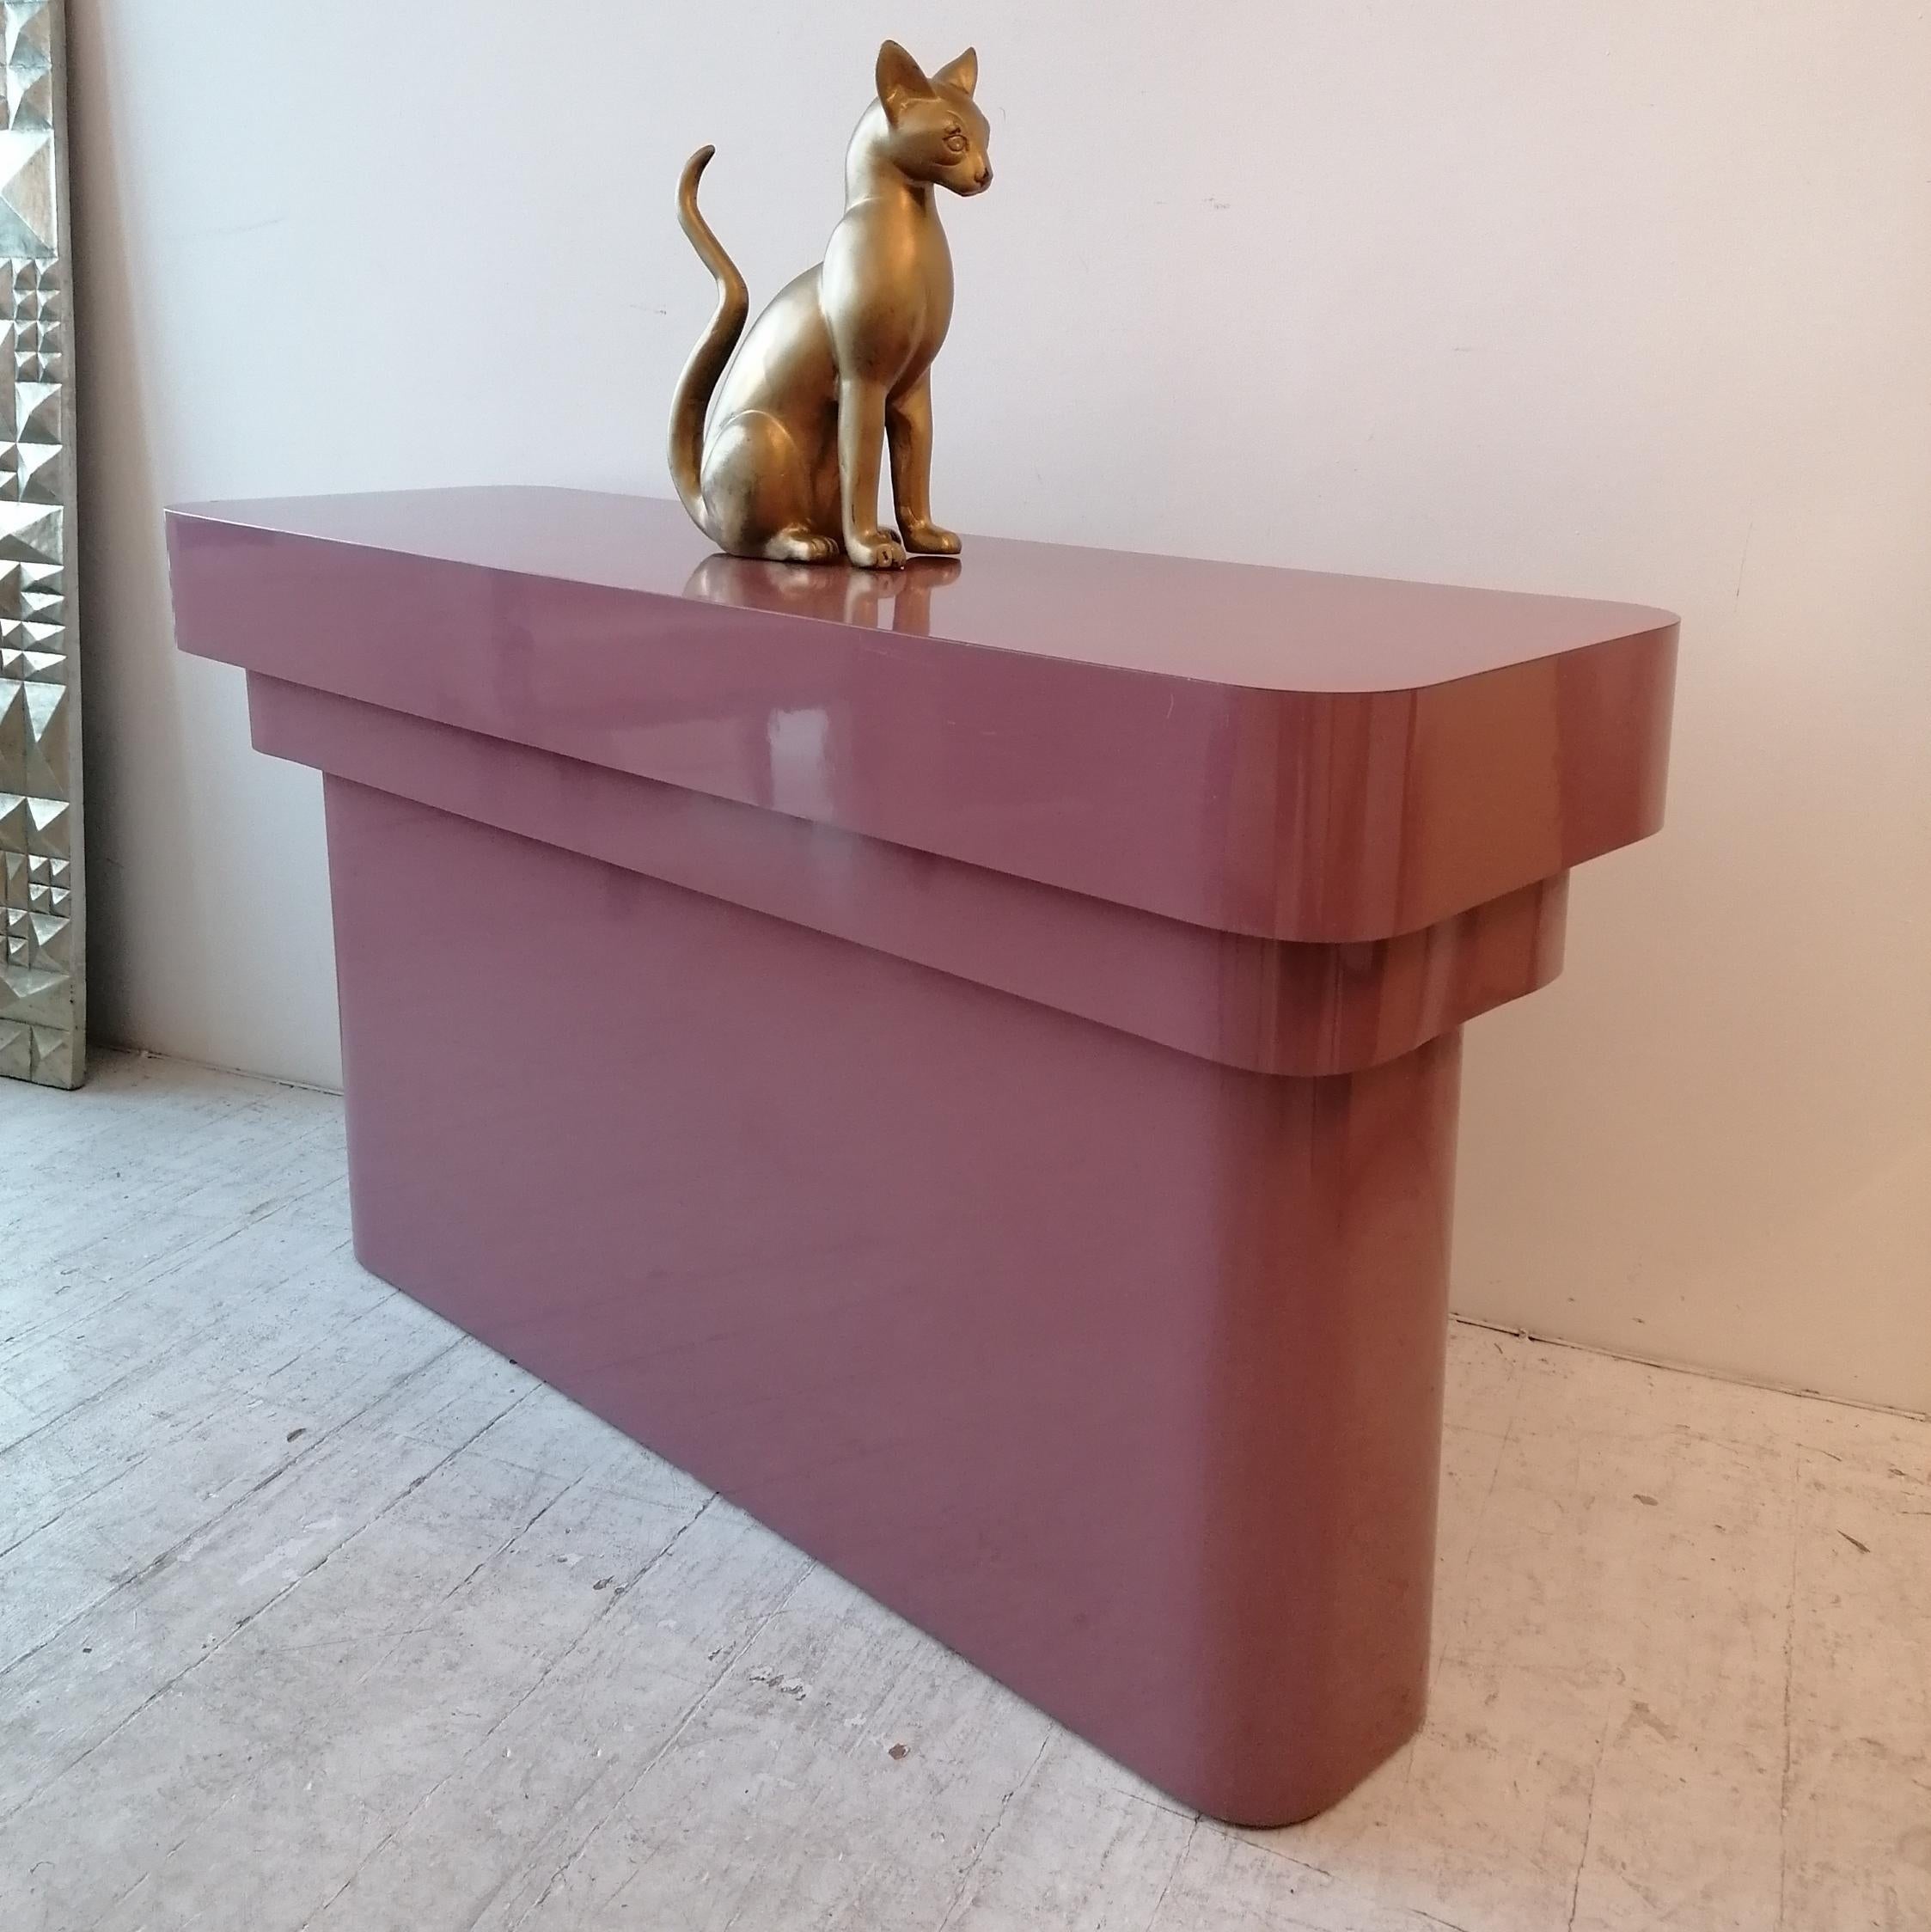 Supercool postmodern 1980s American mauve console table. Great colour, and entirely covered in the mauve laminate- no bare back. Generally good condition for its age- small repaired chip on left side, top edge. Couple scratches, one same end; one at